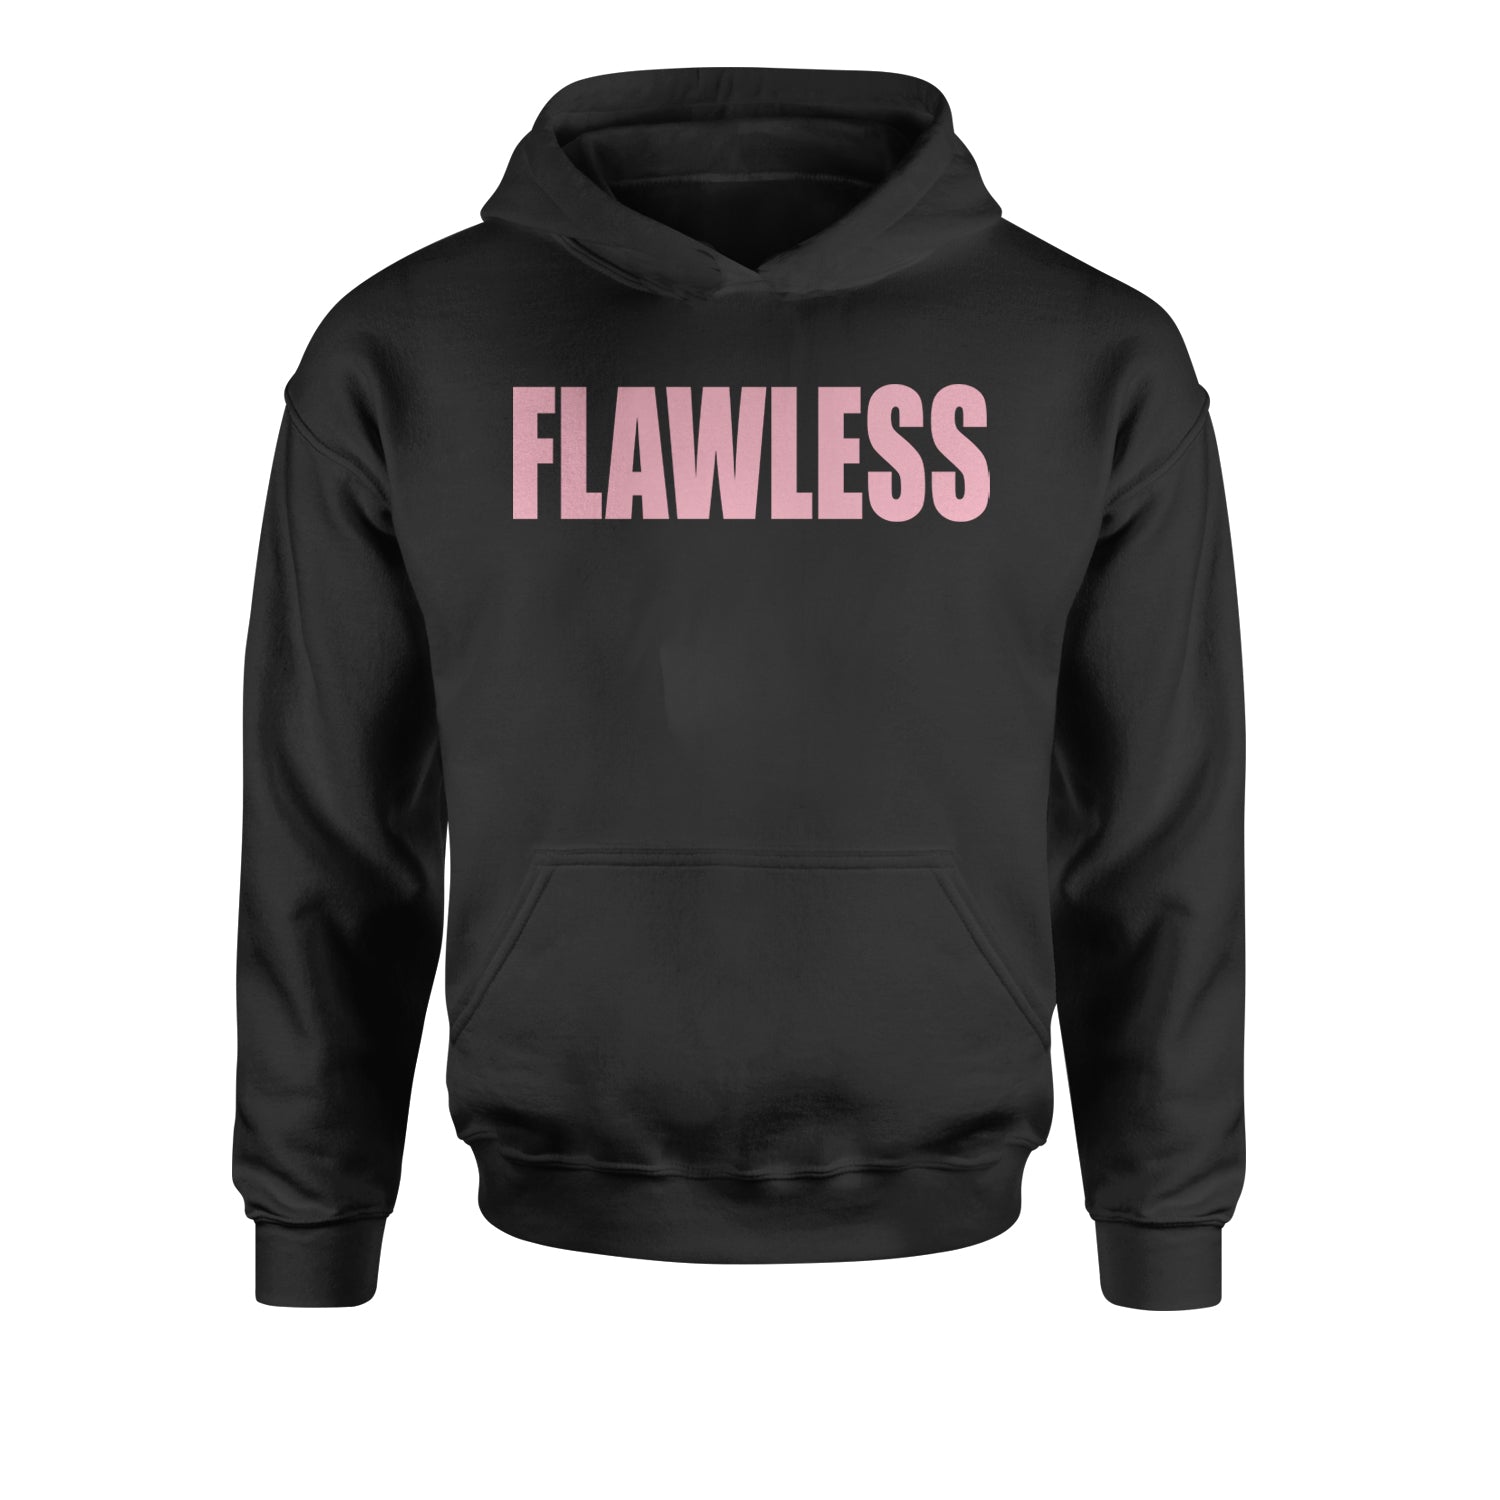 Flawless Renaissance Youth-Sized Hoodie